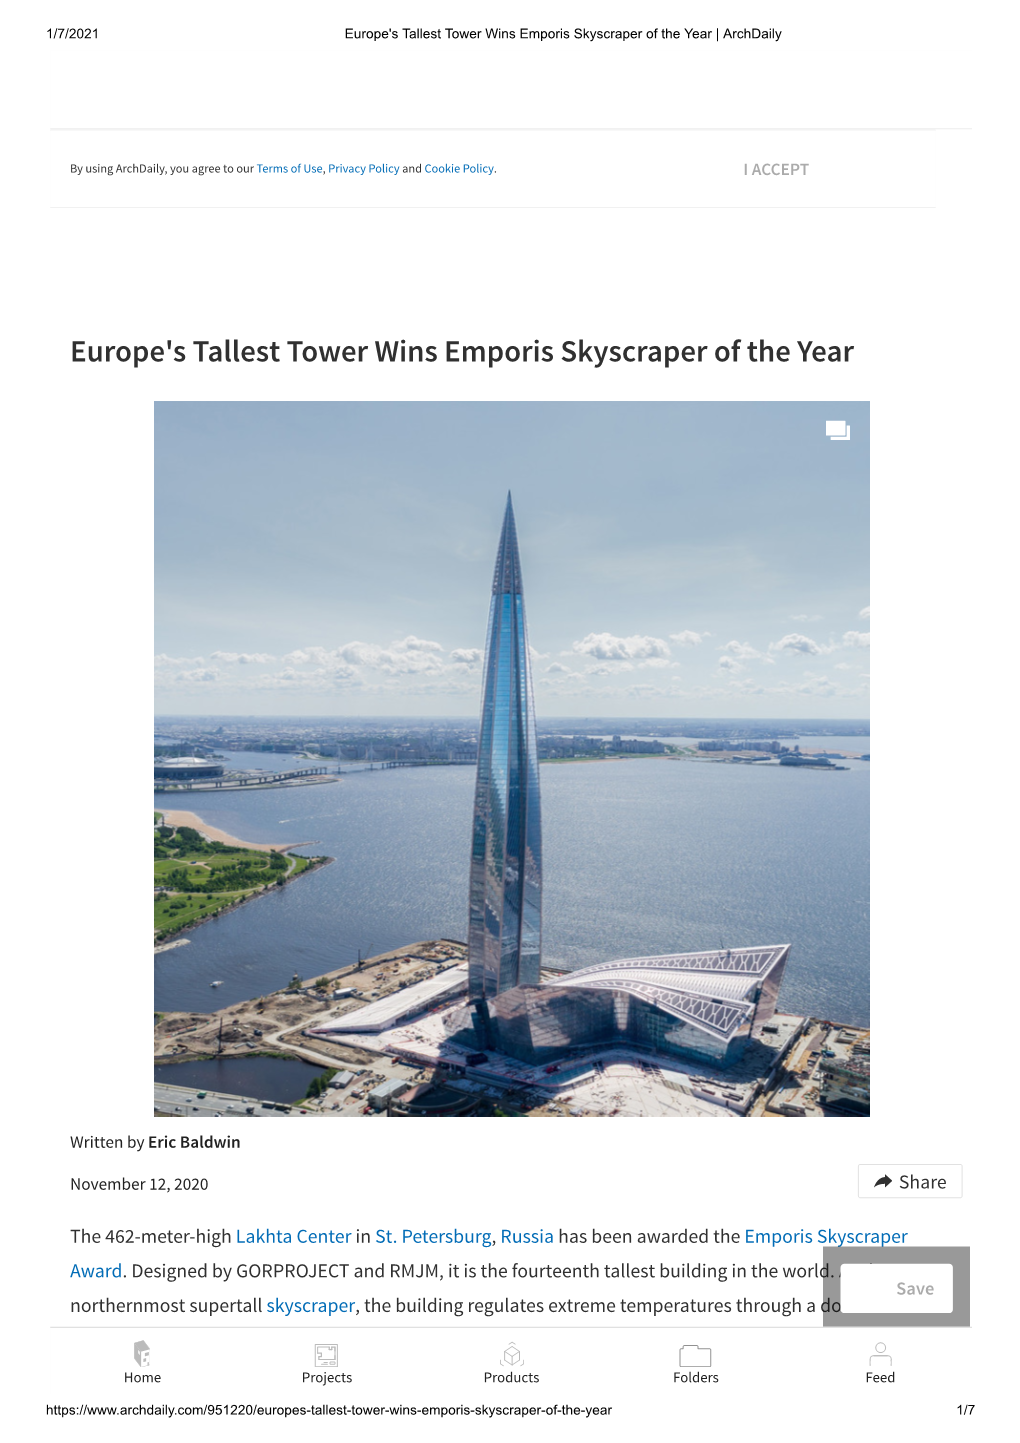 Europe's Tallest Tower Wins Emporis Skyscraper of the Year | Archdaily